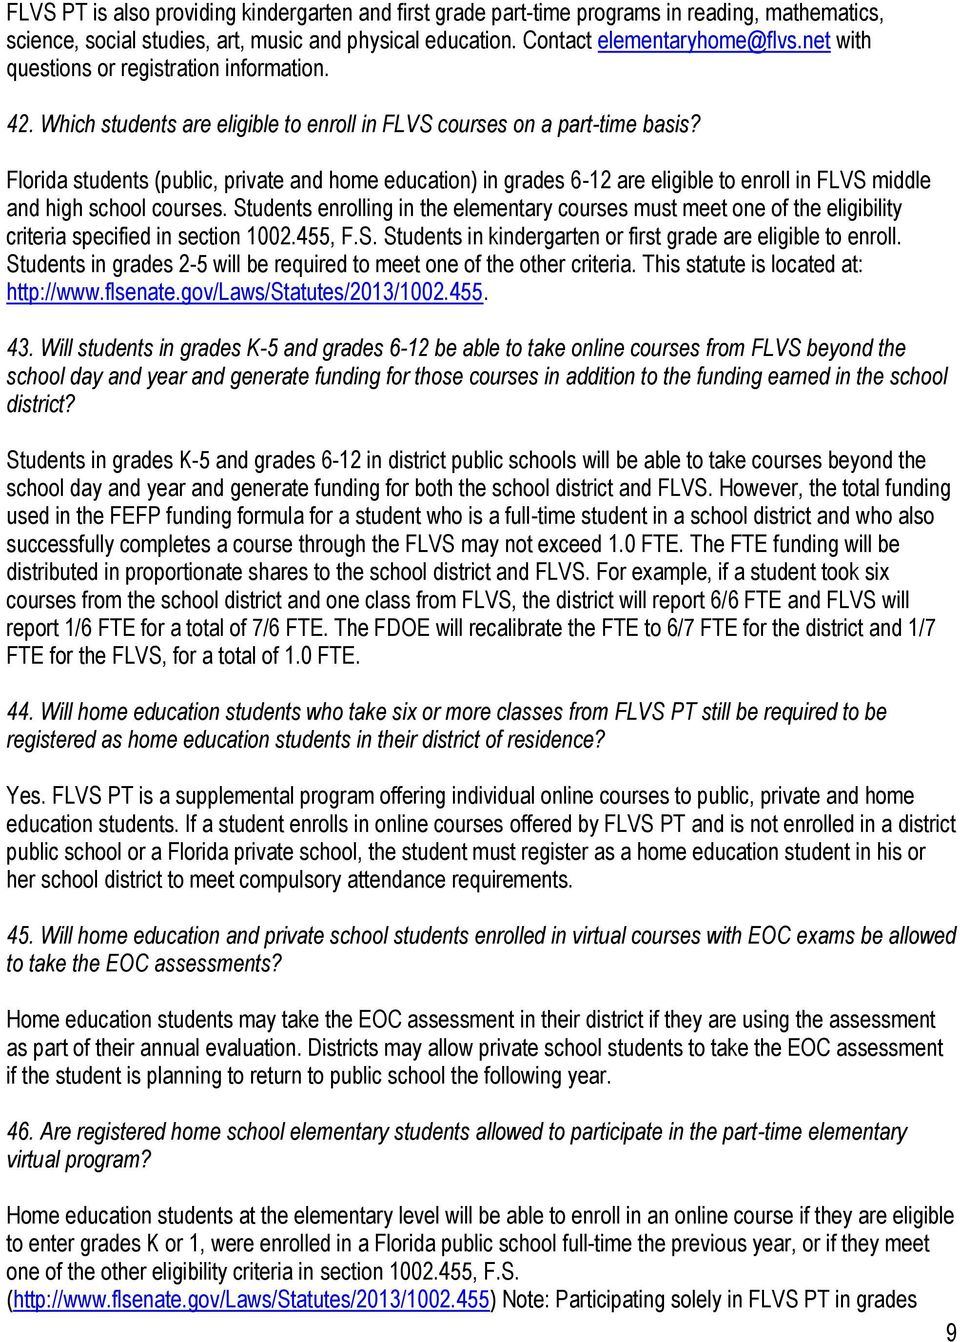 Florida students (public, private and home education) in grades 6-12 are eligible to enroll in FLVS middle and high school courses.